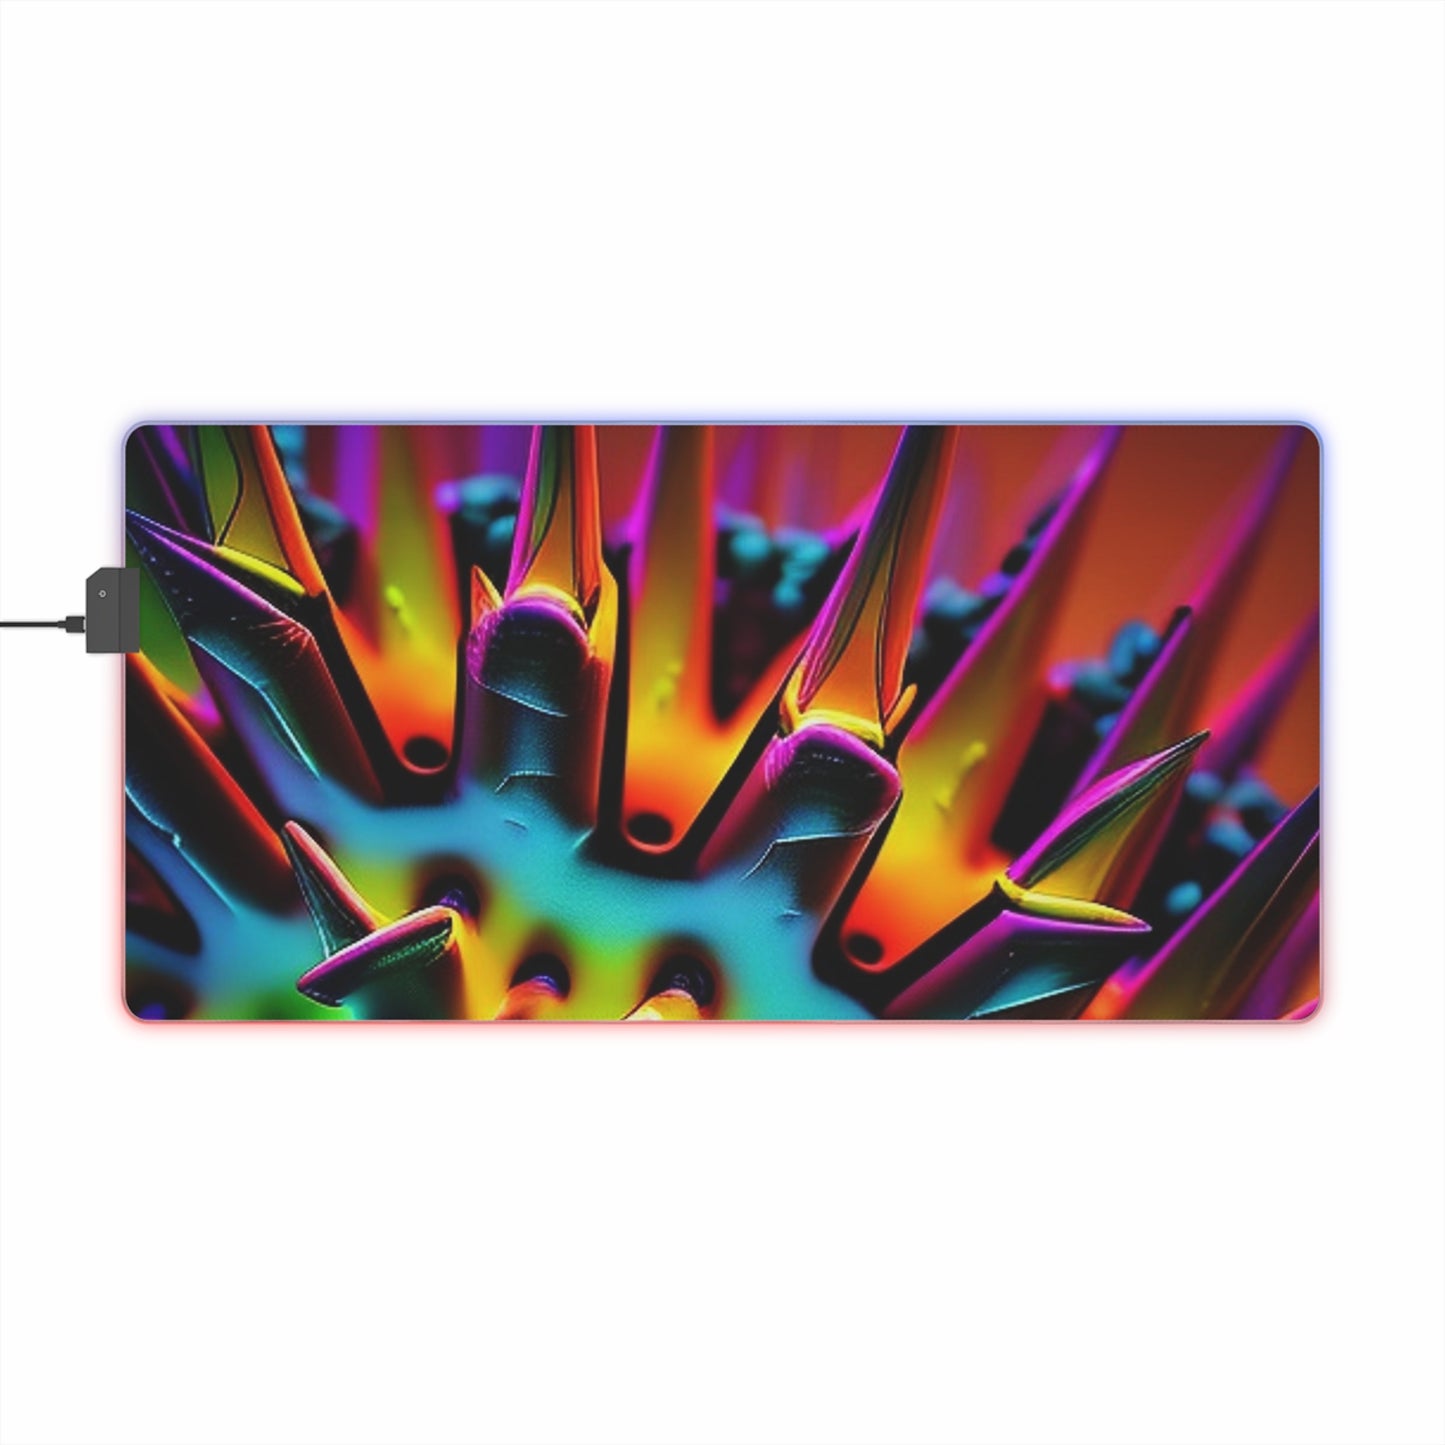 LED Gaming Mouse Pad  Macro Neon Spike 4